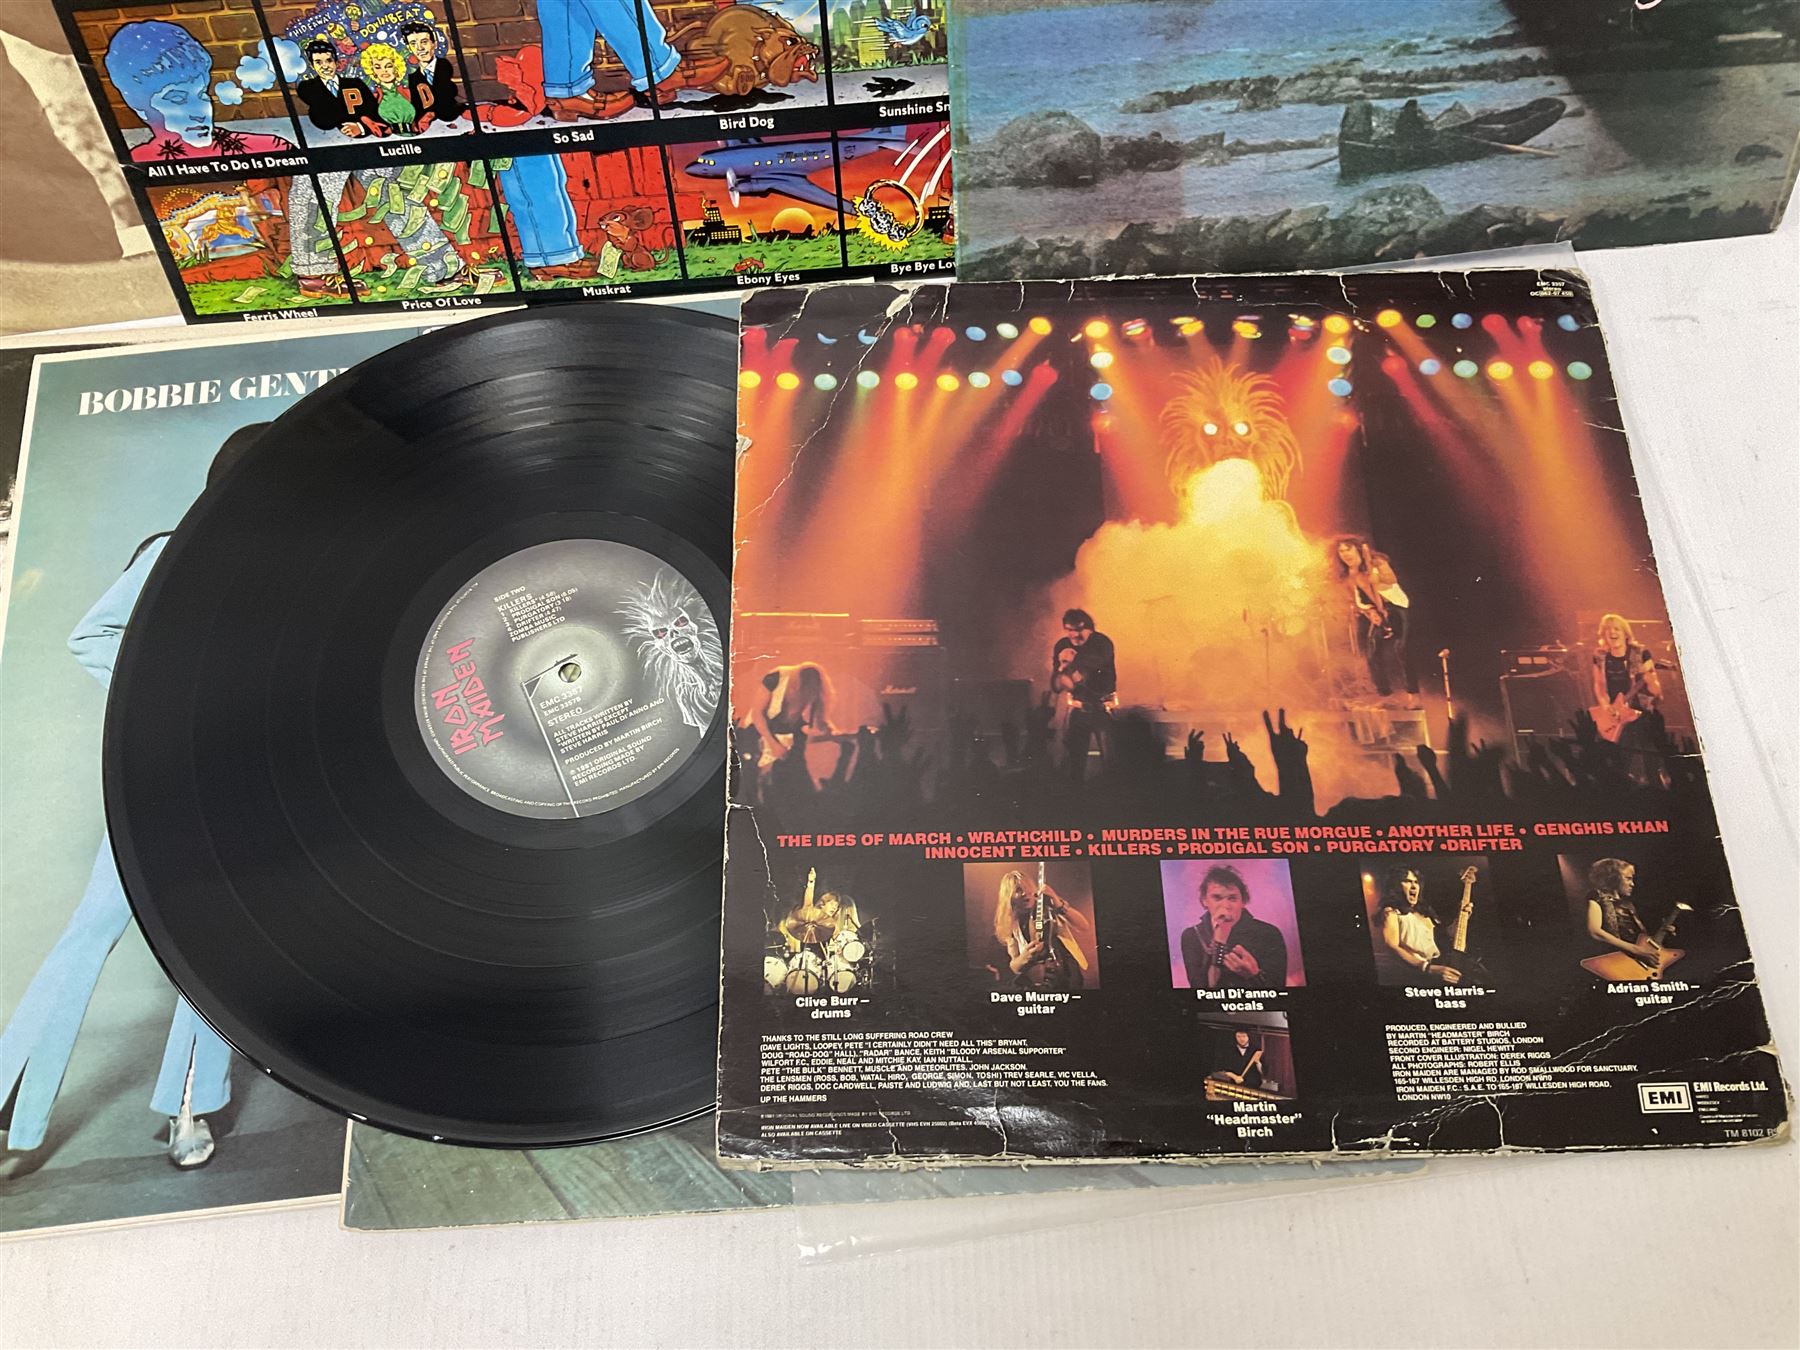 Vinyl LP records including Iron Maiden Killers - Image 8 of 11